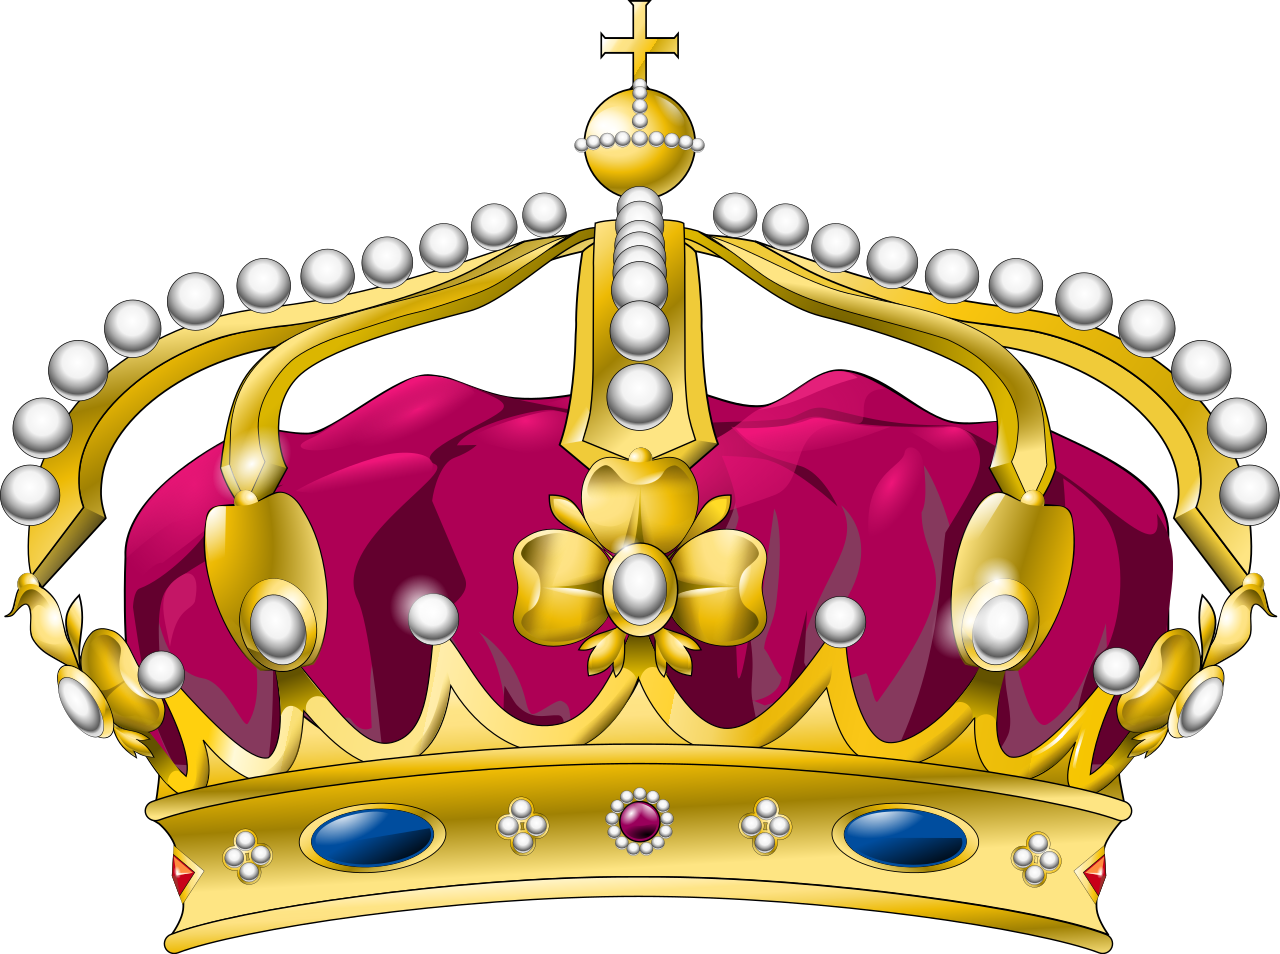 File Royal Crown Curved Svg Wikimedia Commons